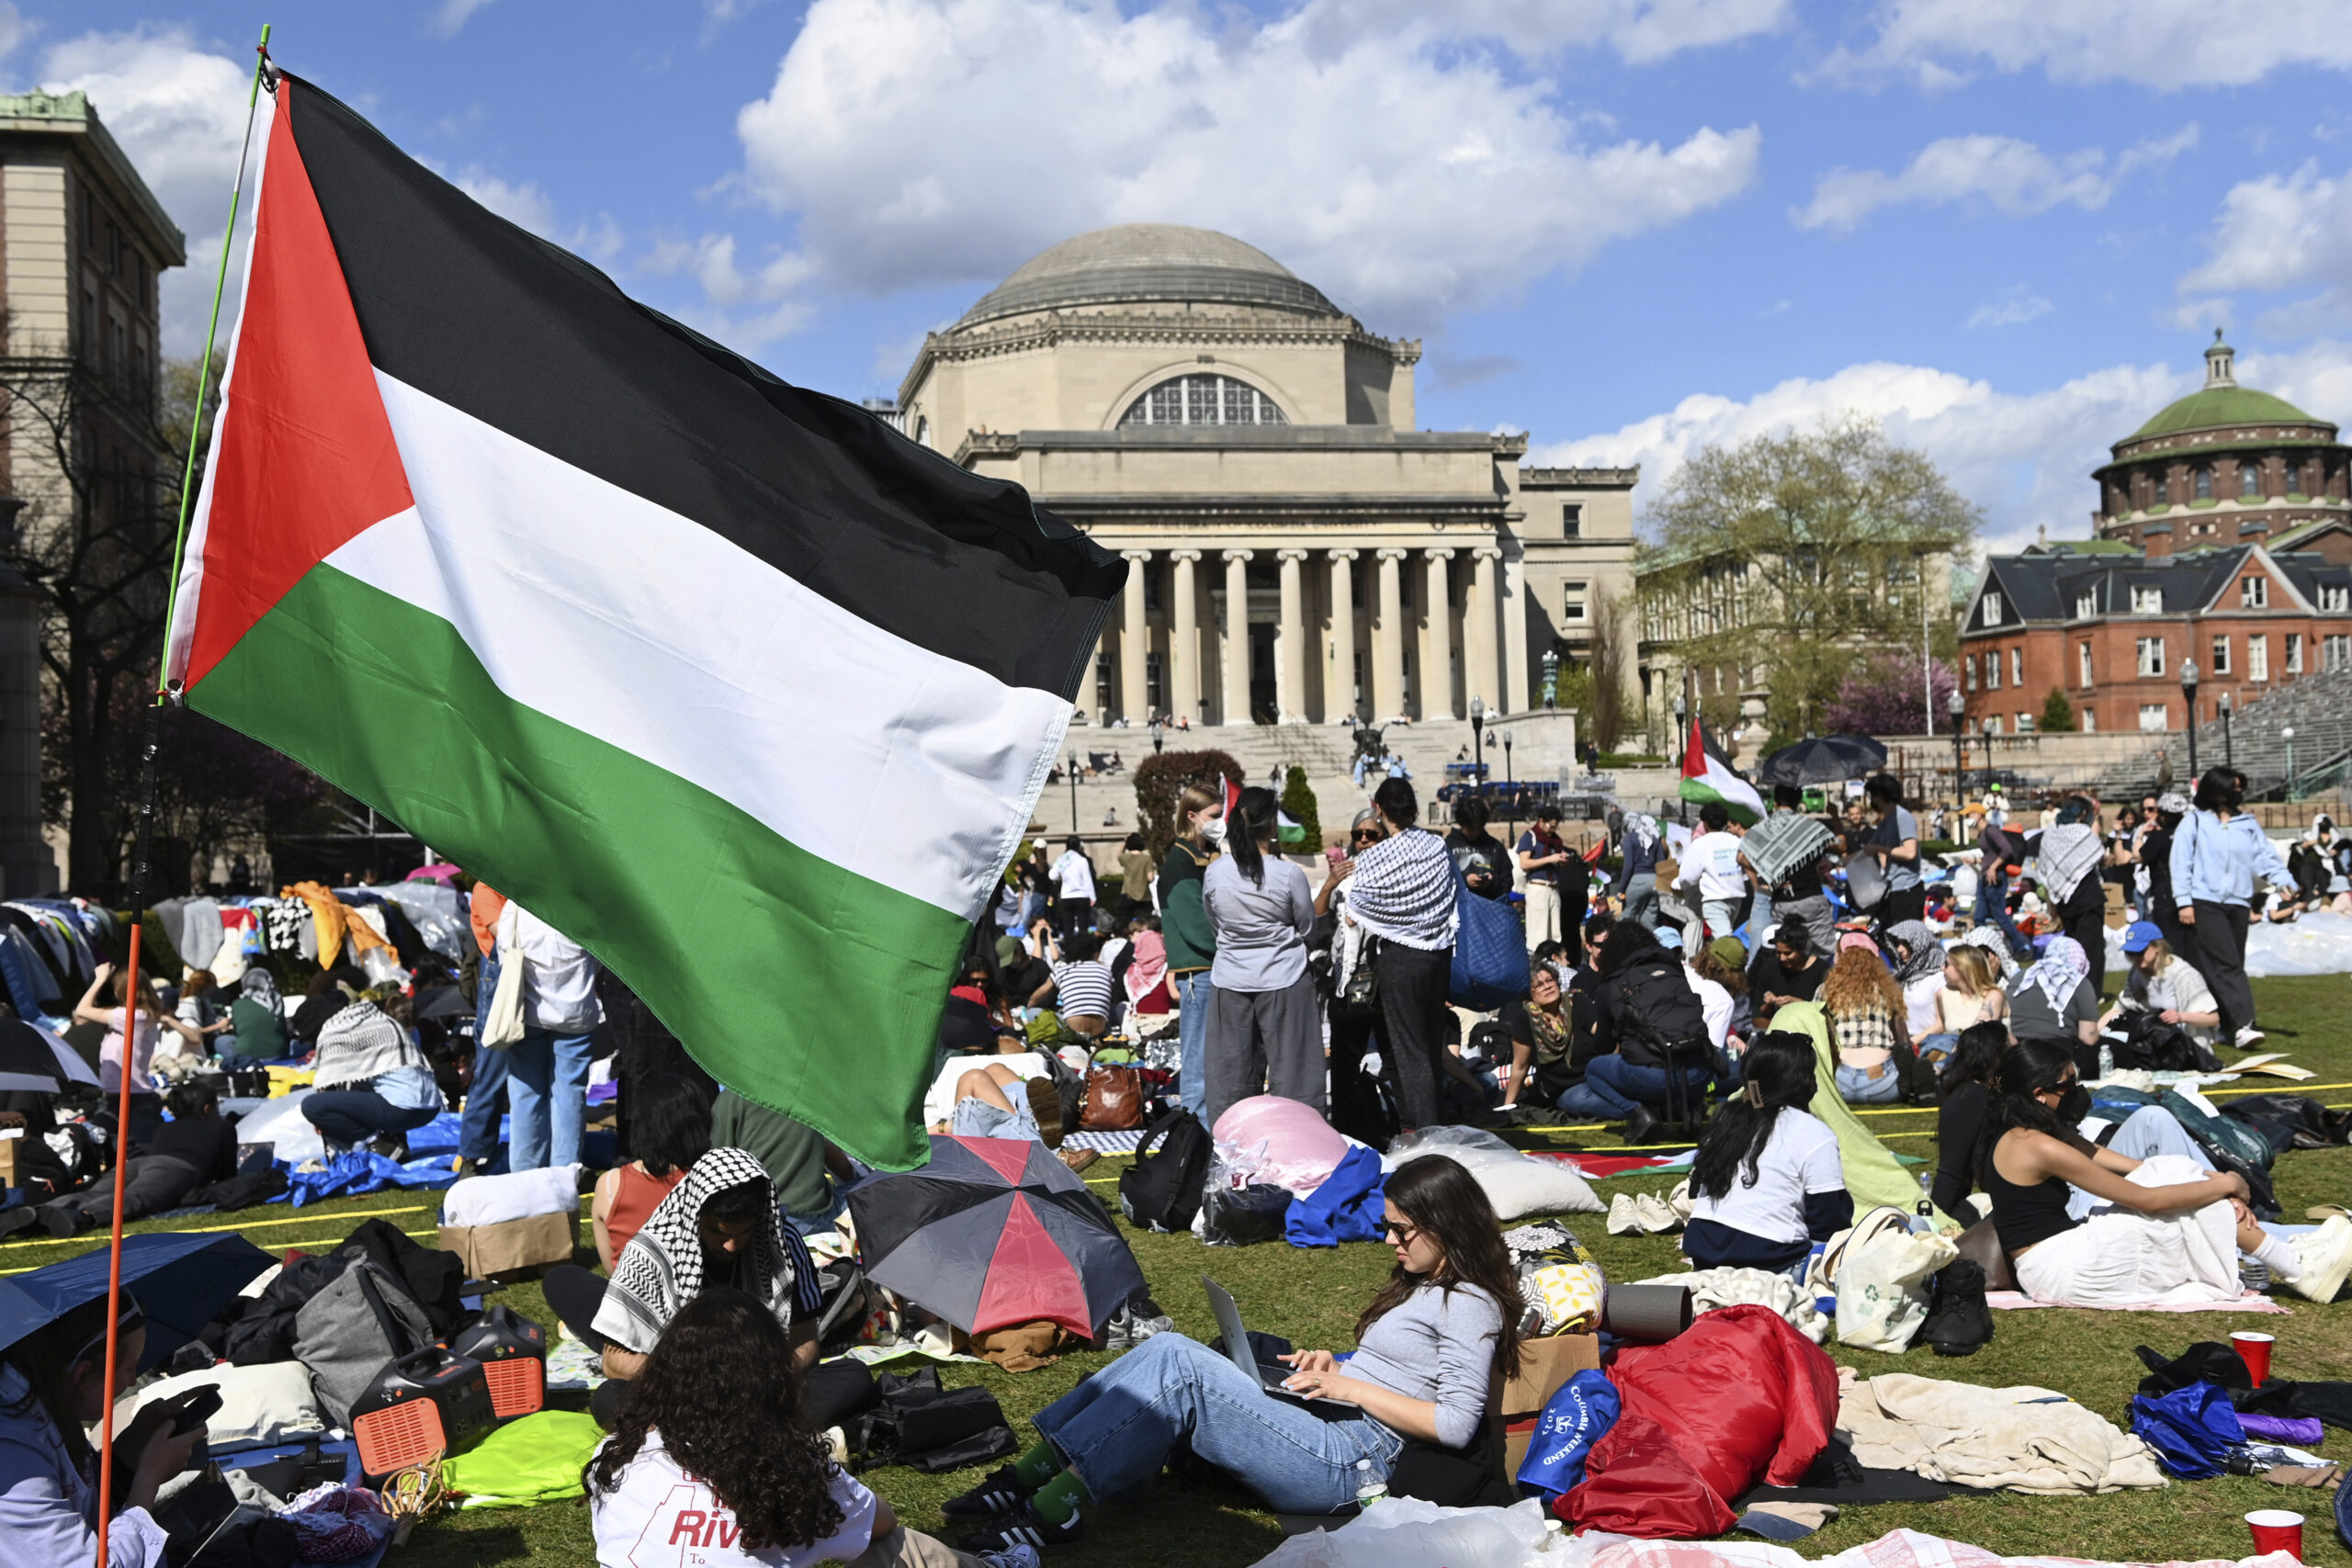 Rabbi at Columbia University Issues Stunning Call for Jewish Students to Leave Campus: ‘Cannot Guarantee Jewish Students’ Safety’